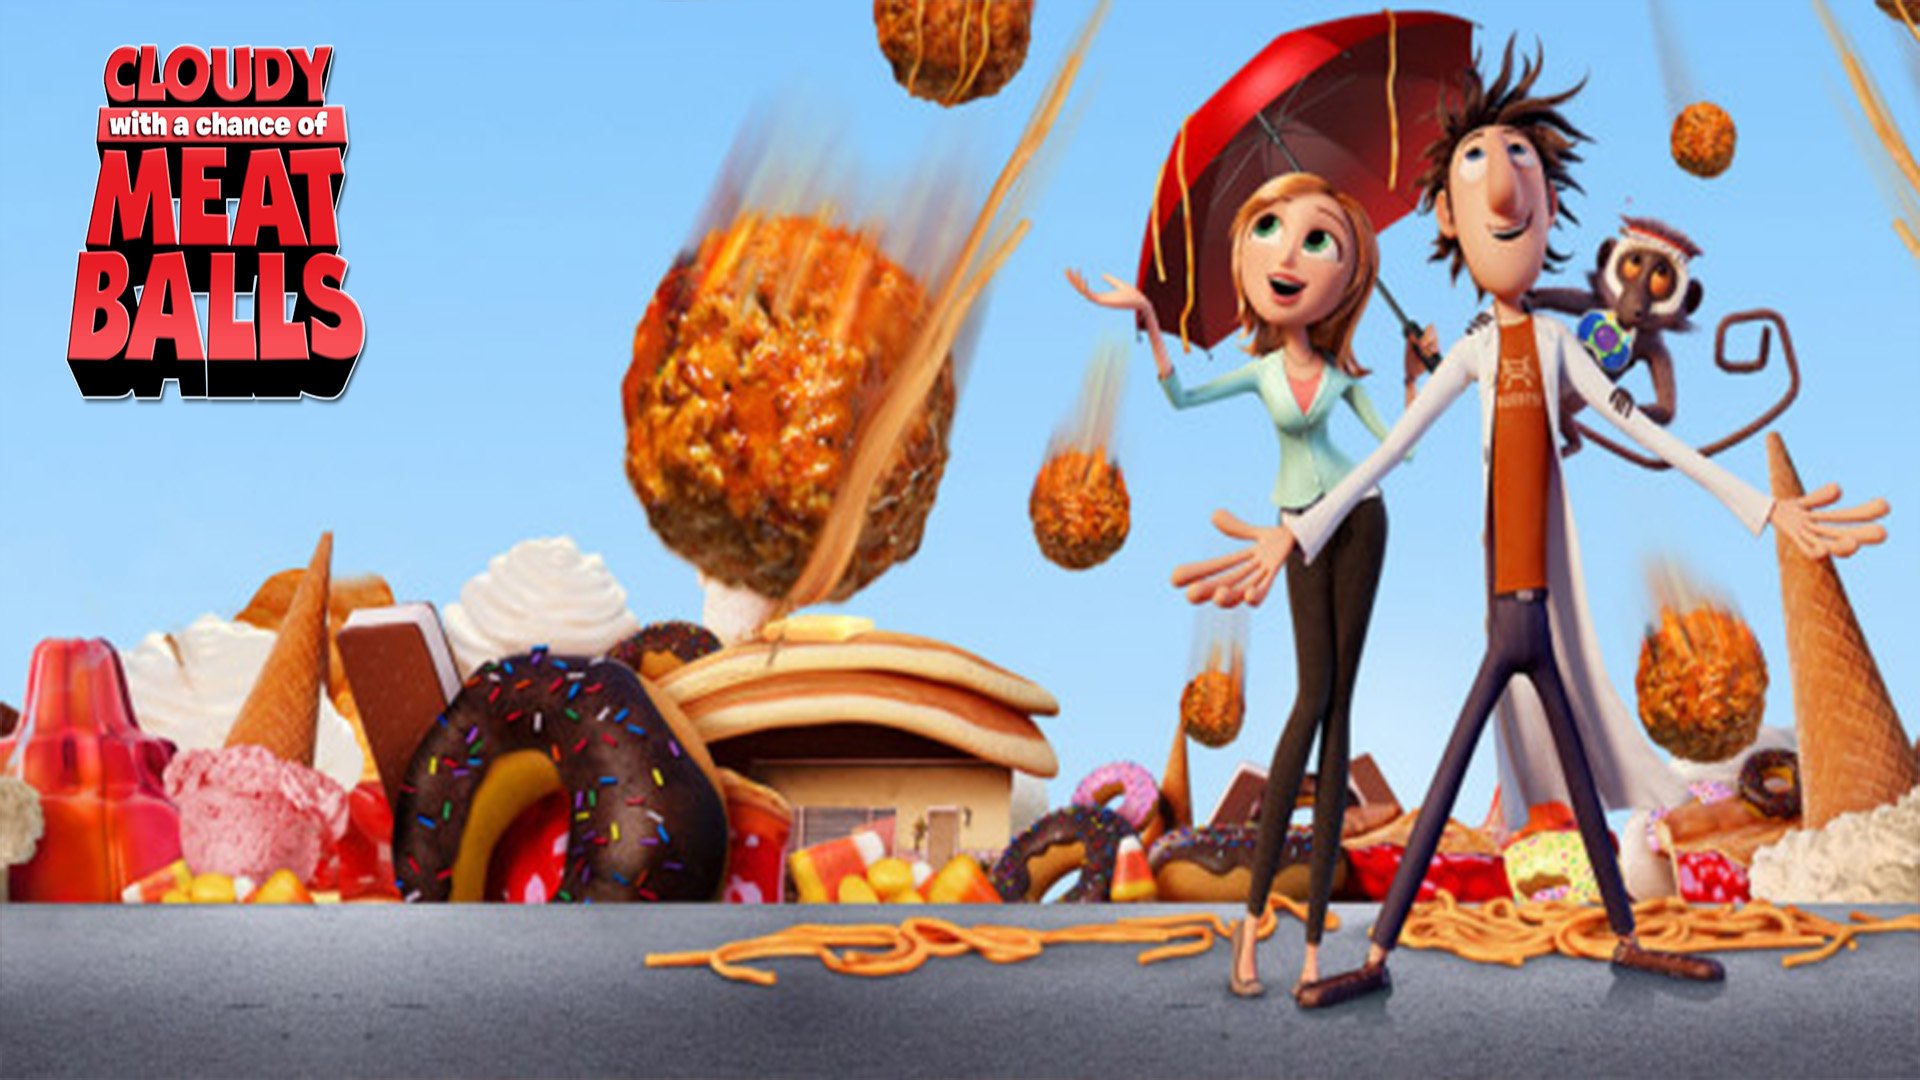 1920x1080 Cloudy With A Chance Of Meatballs Wallpaper Background Image. 